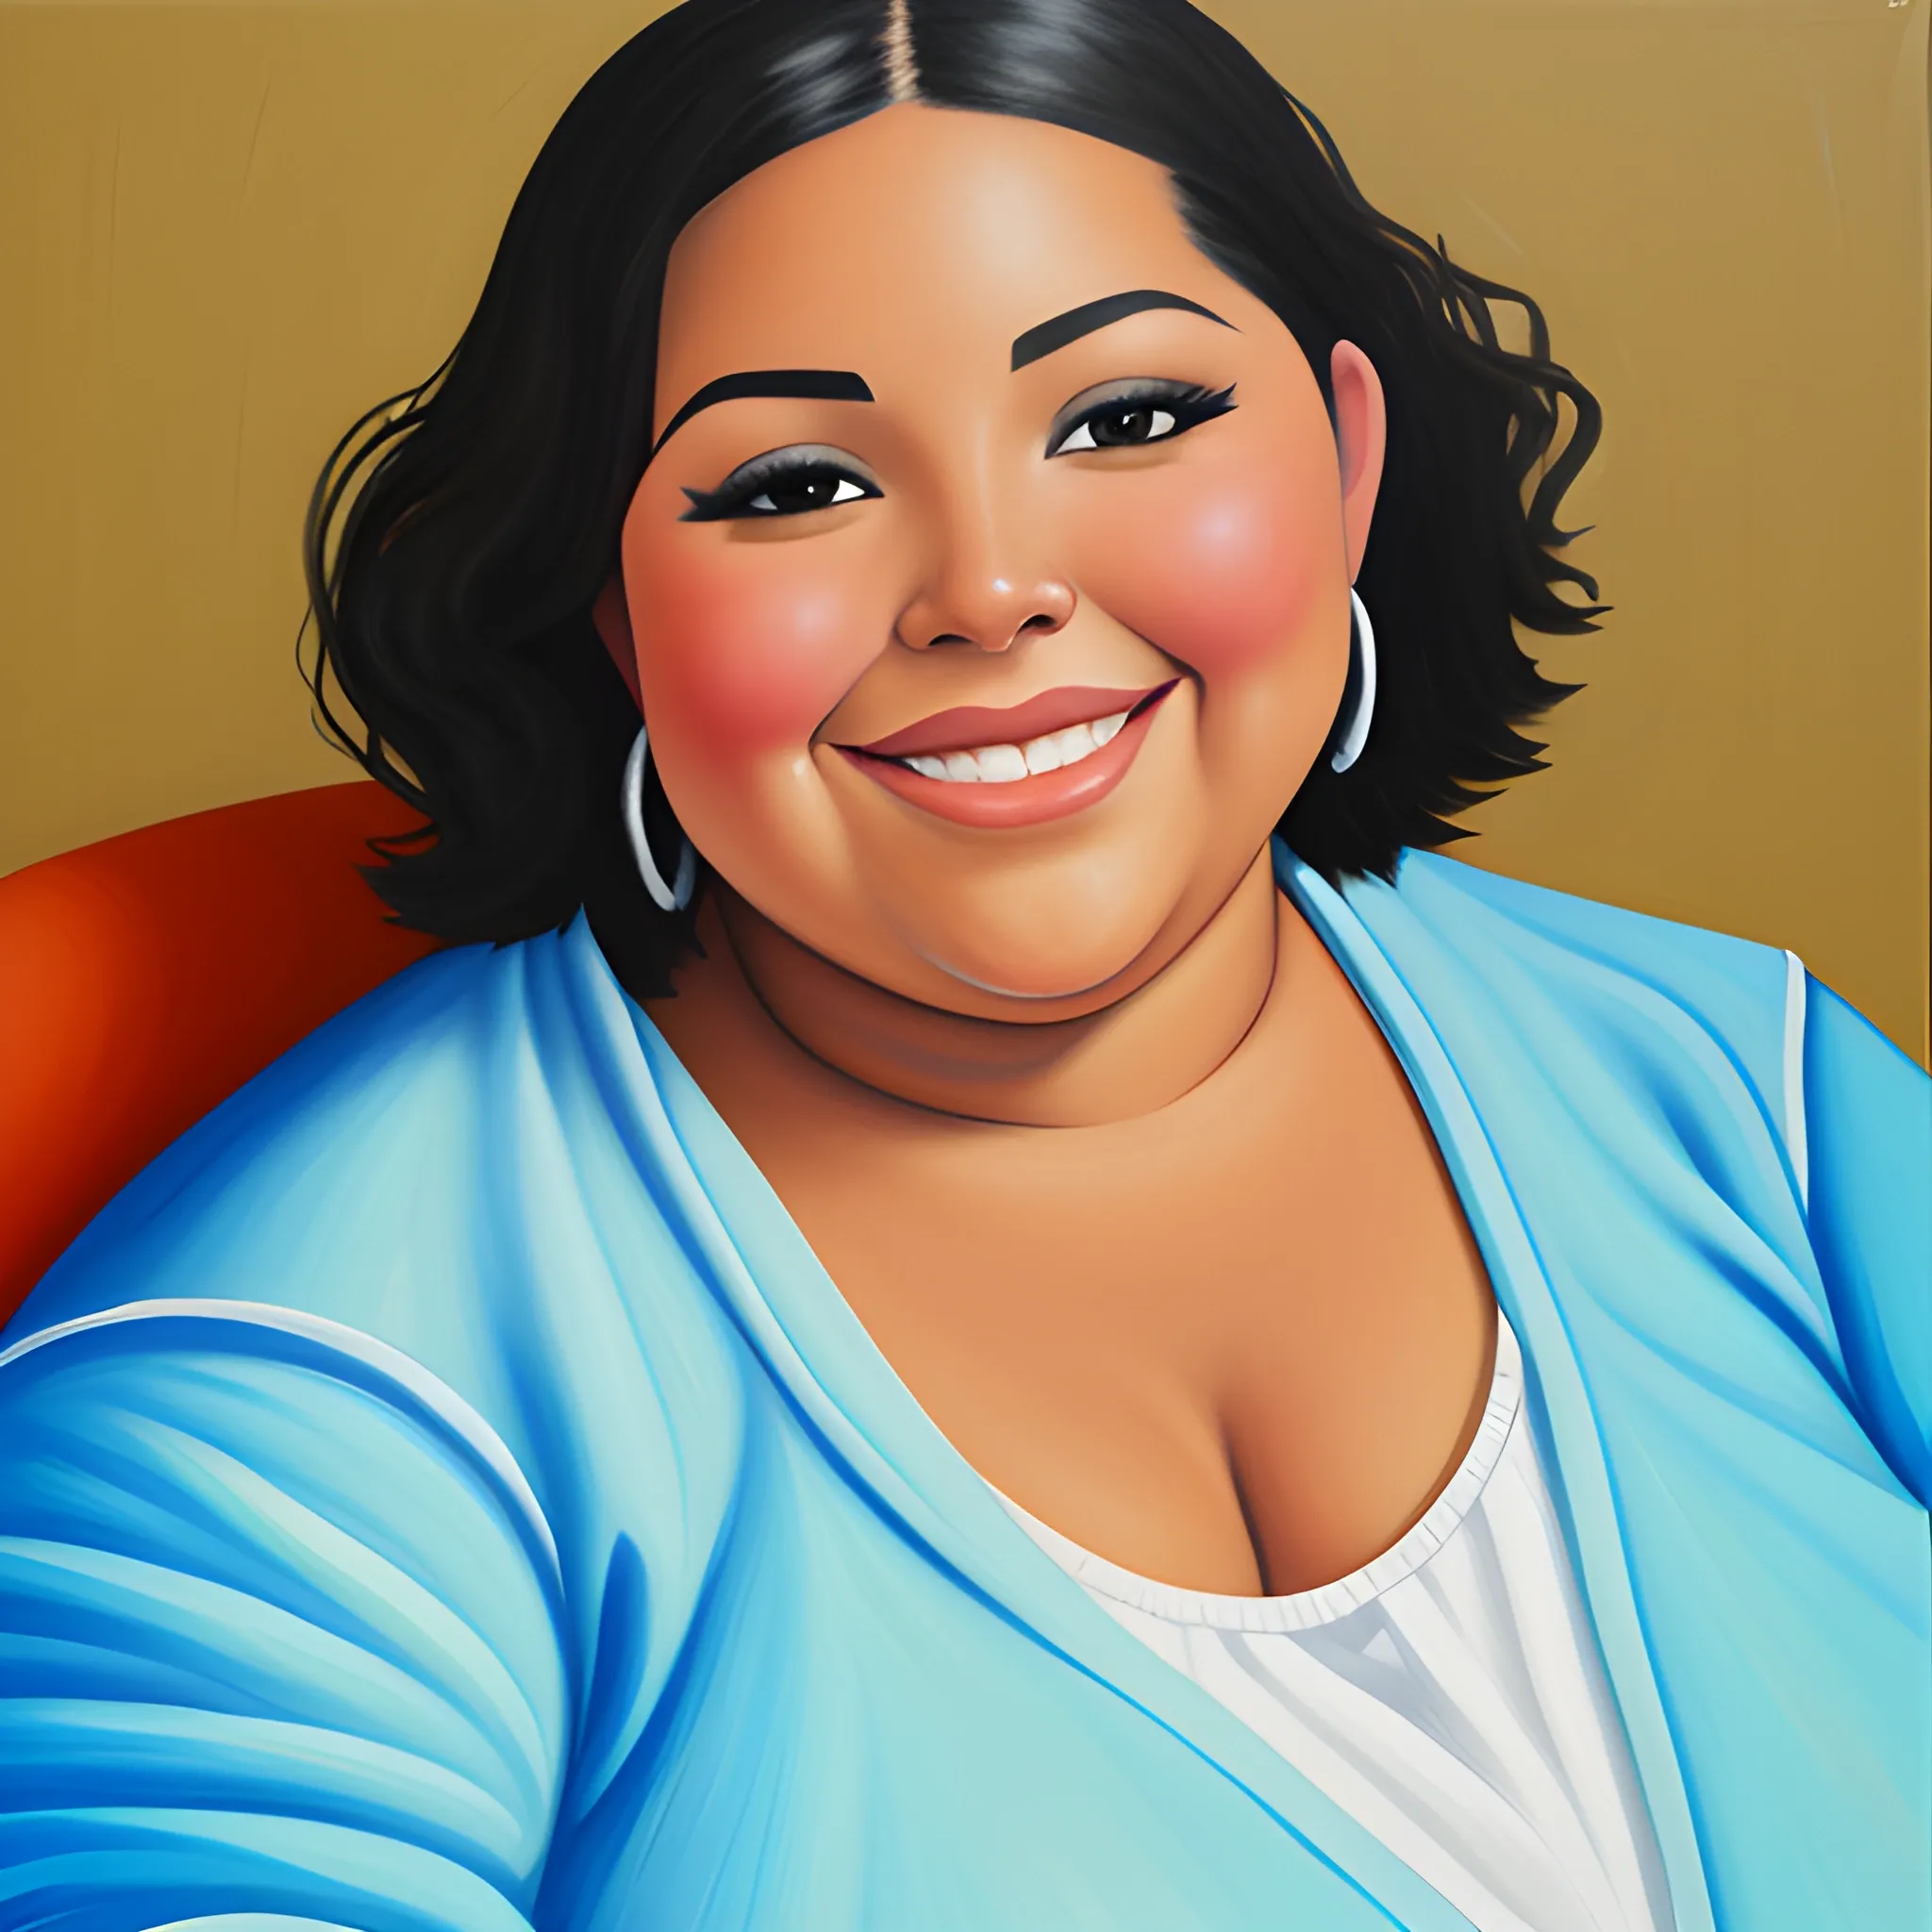 Chubby latina is smiling, Oil Painting